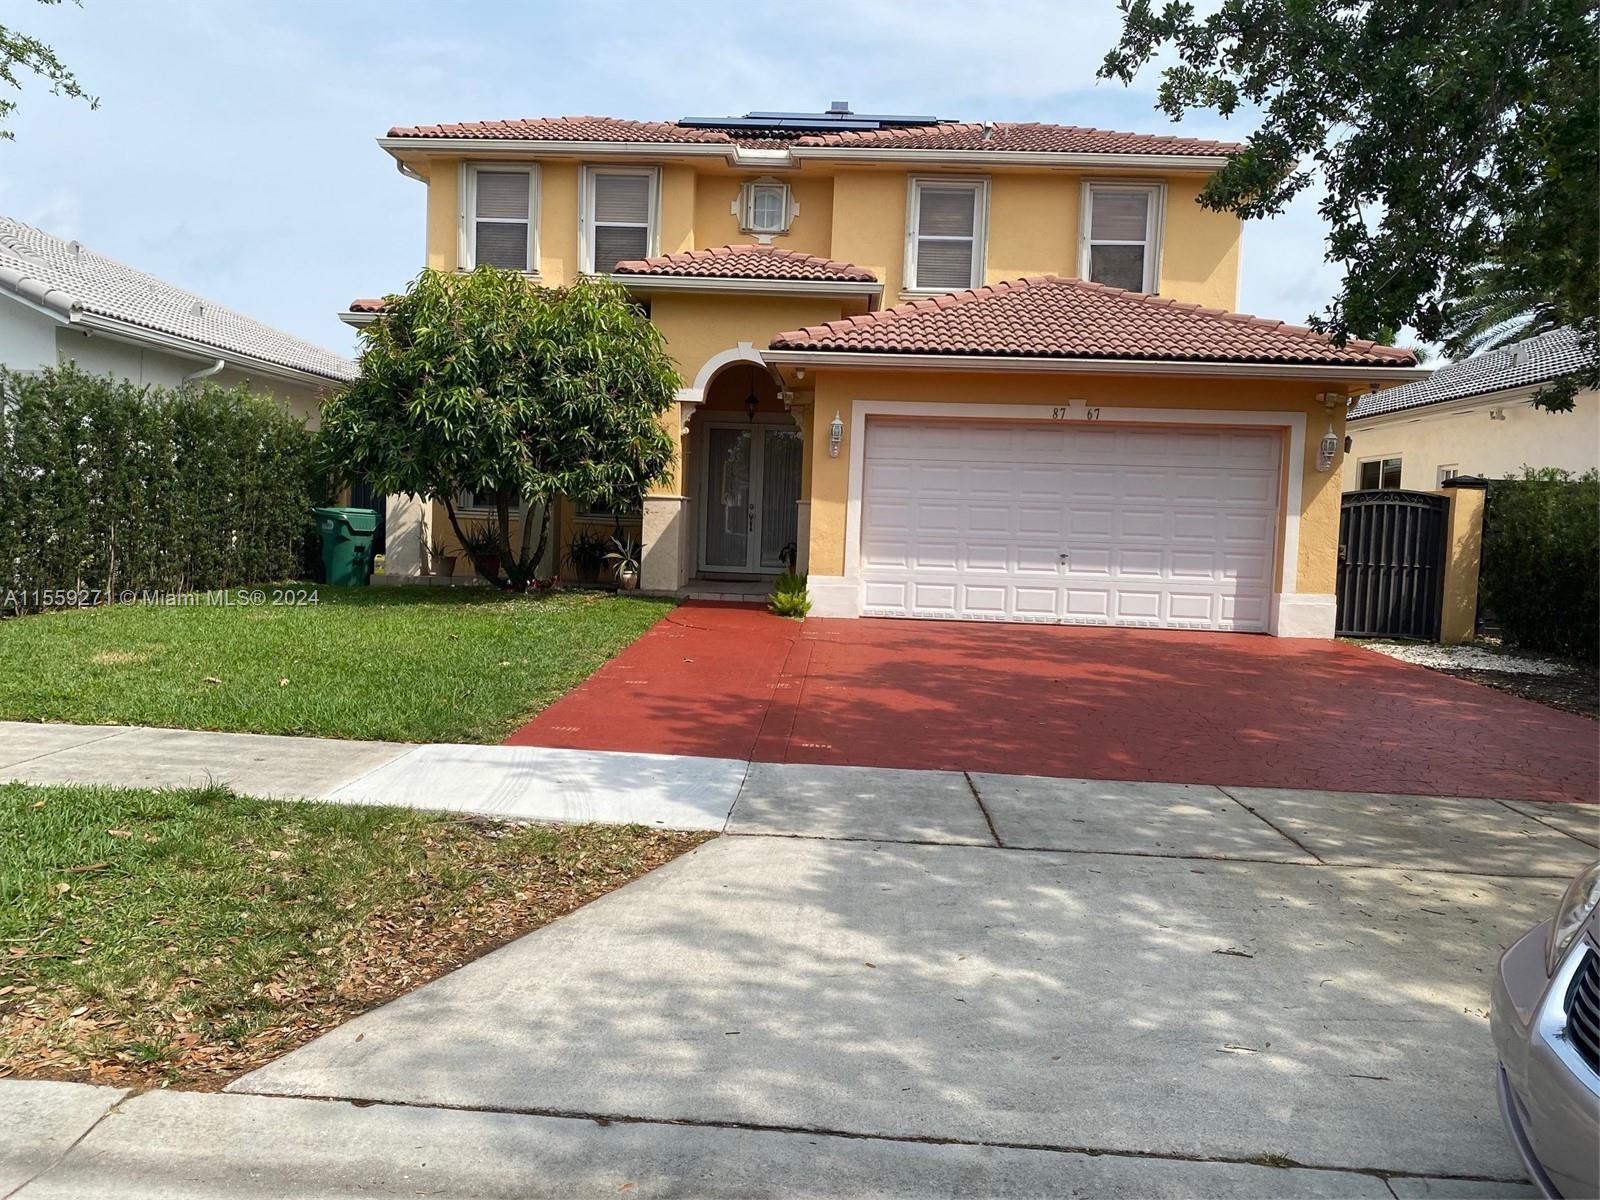 Excellent home in the desired Miami Lakes Neighborhood. No HOA!!! Convenient located near the I-75 &